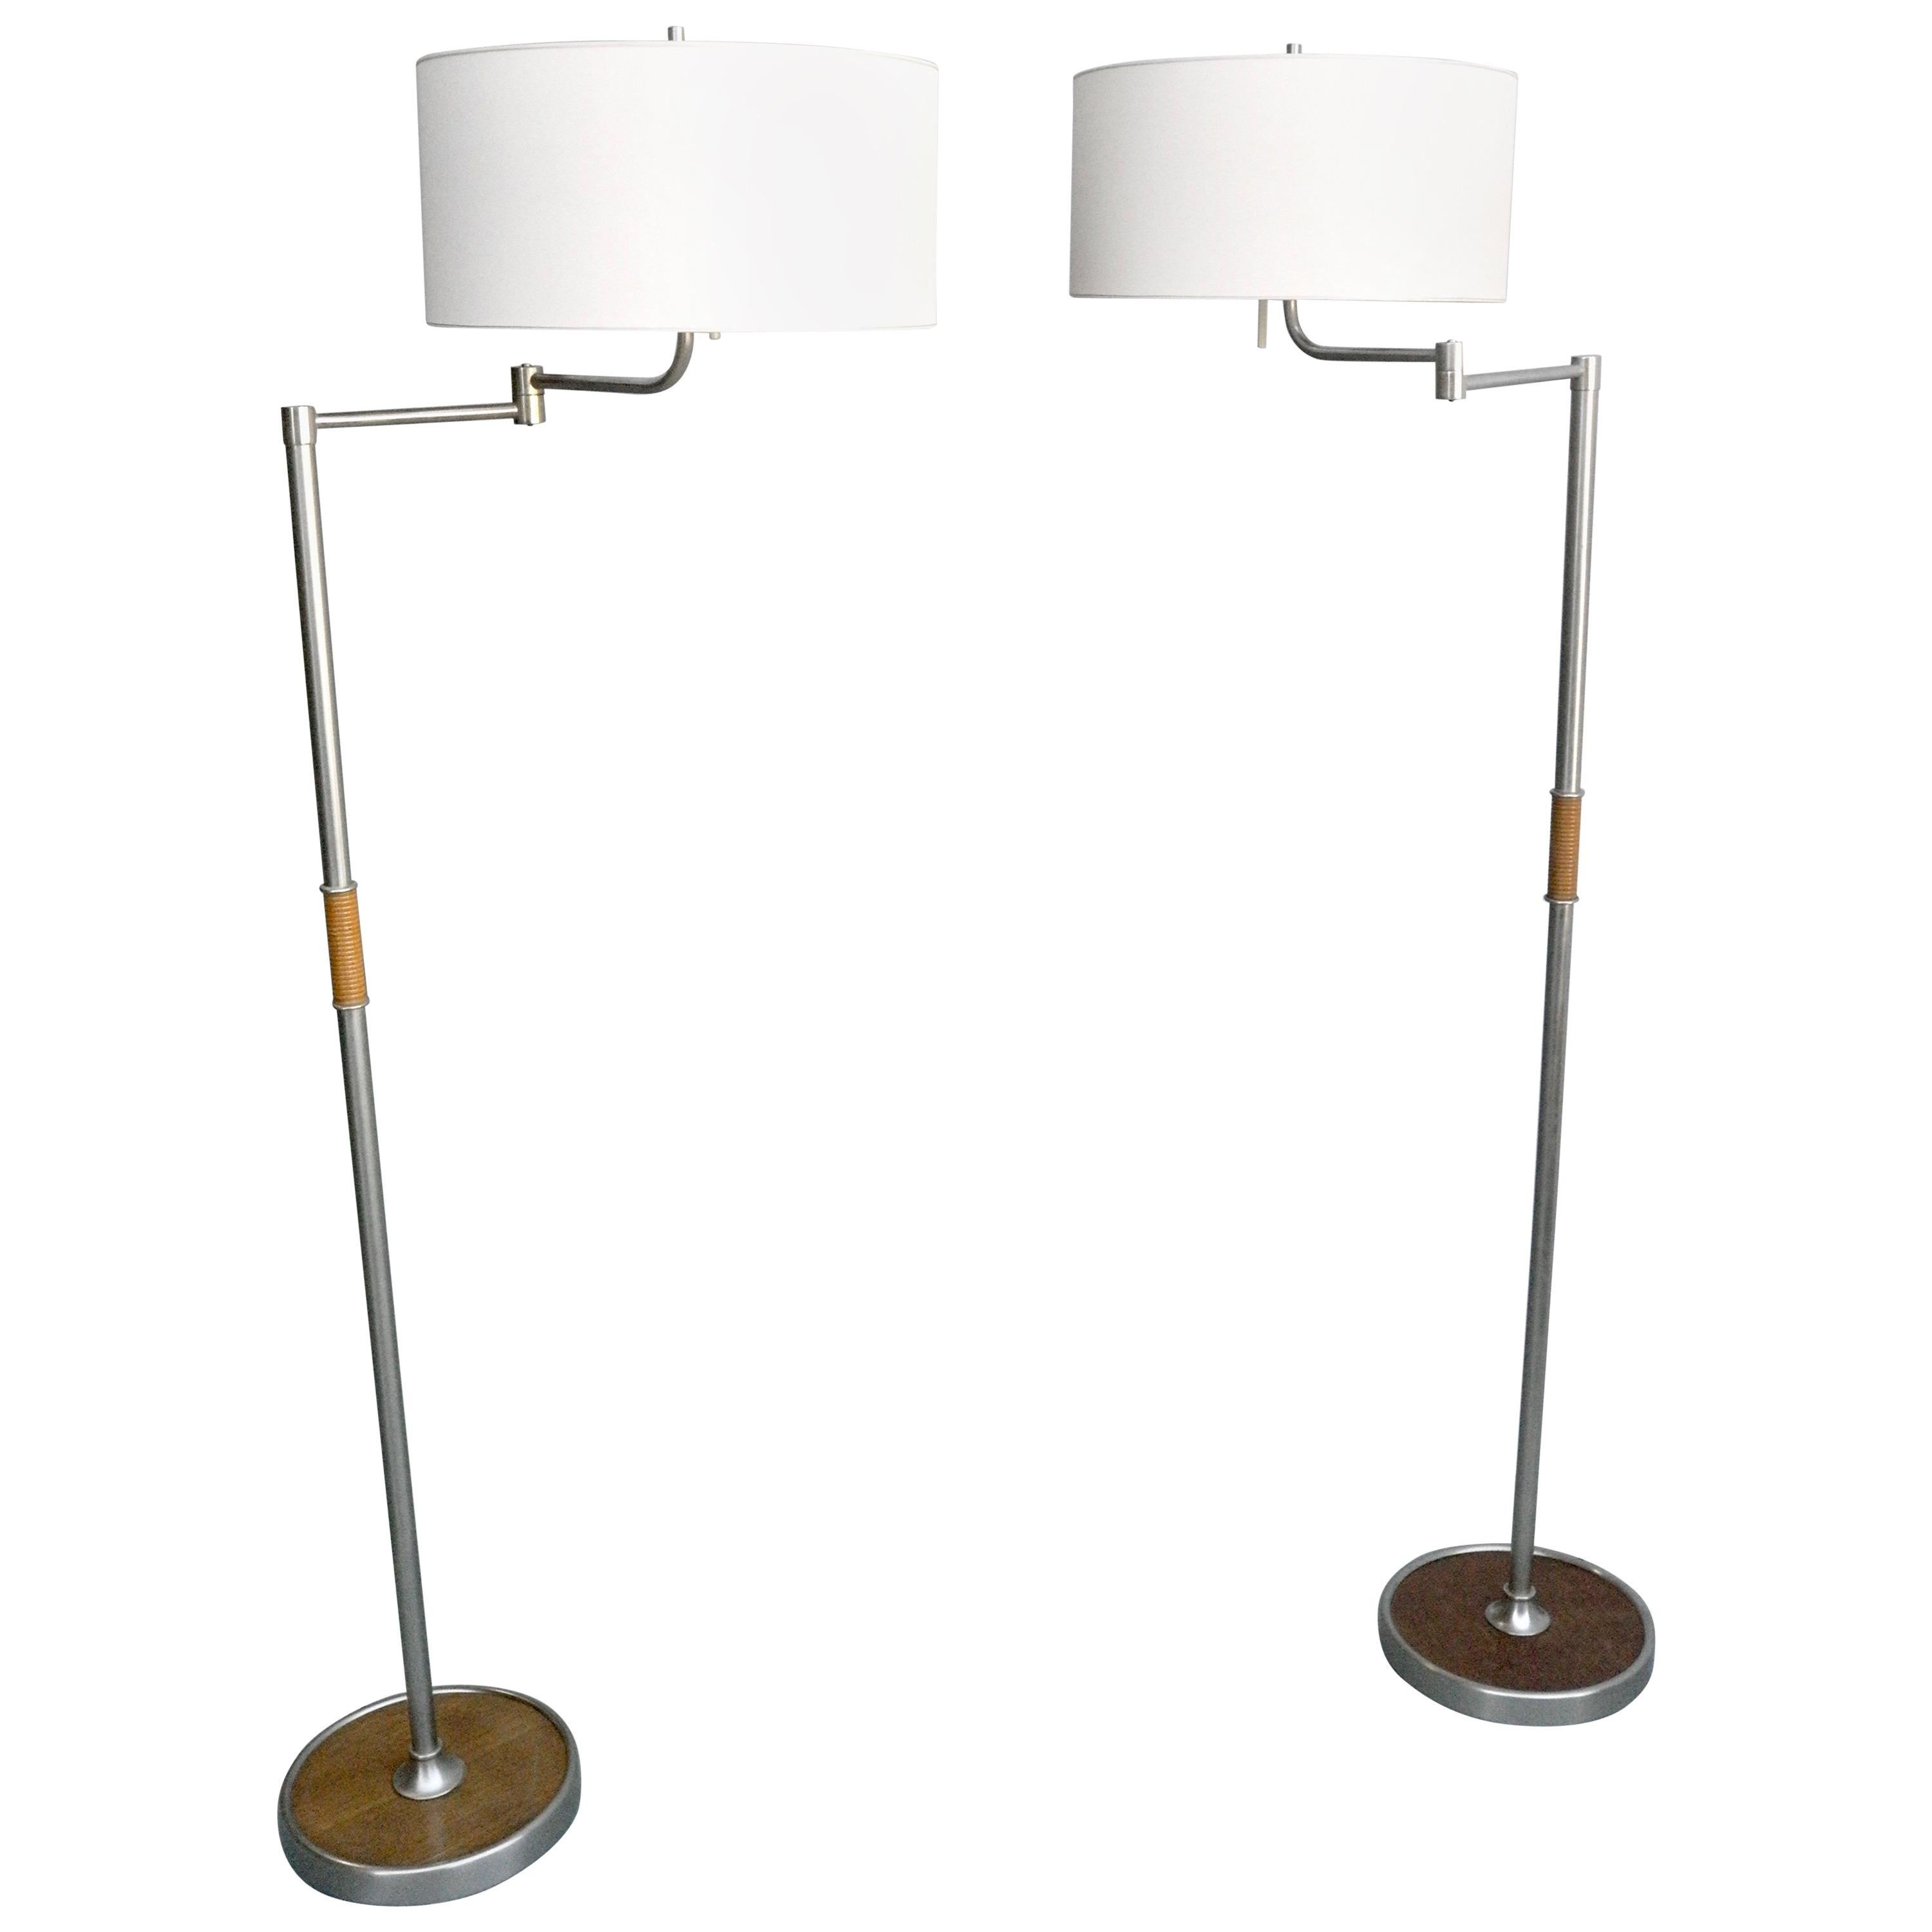 Pair of Mid Century Swing-Arm Floor Lamps in Metal with Faux Bamboo Wood Details